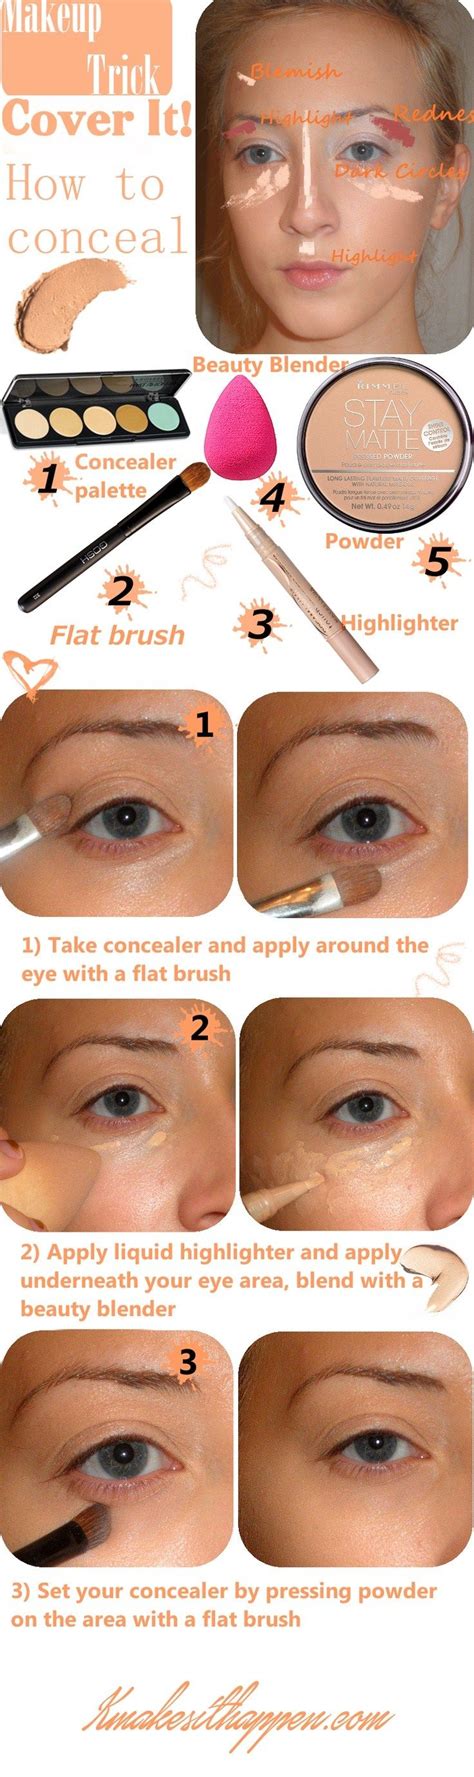 How To Use Concealer Makeup Pinterest